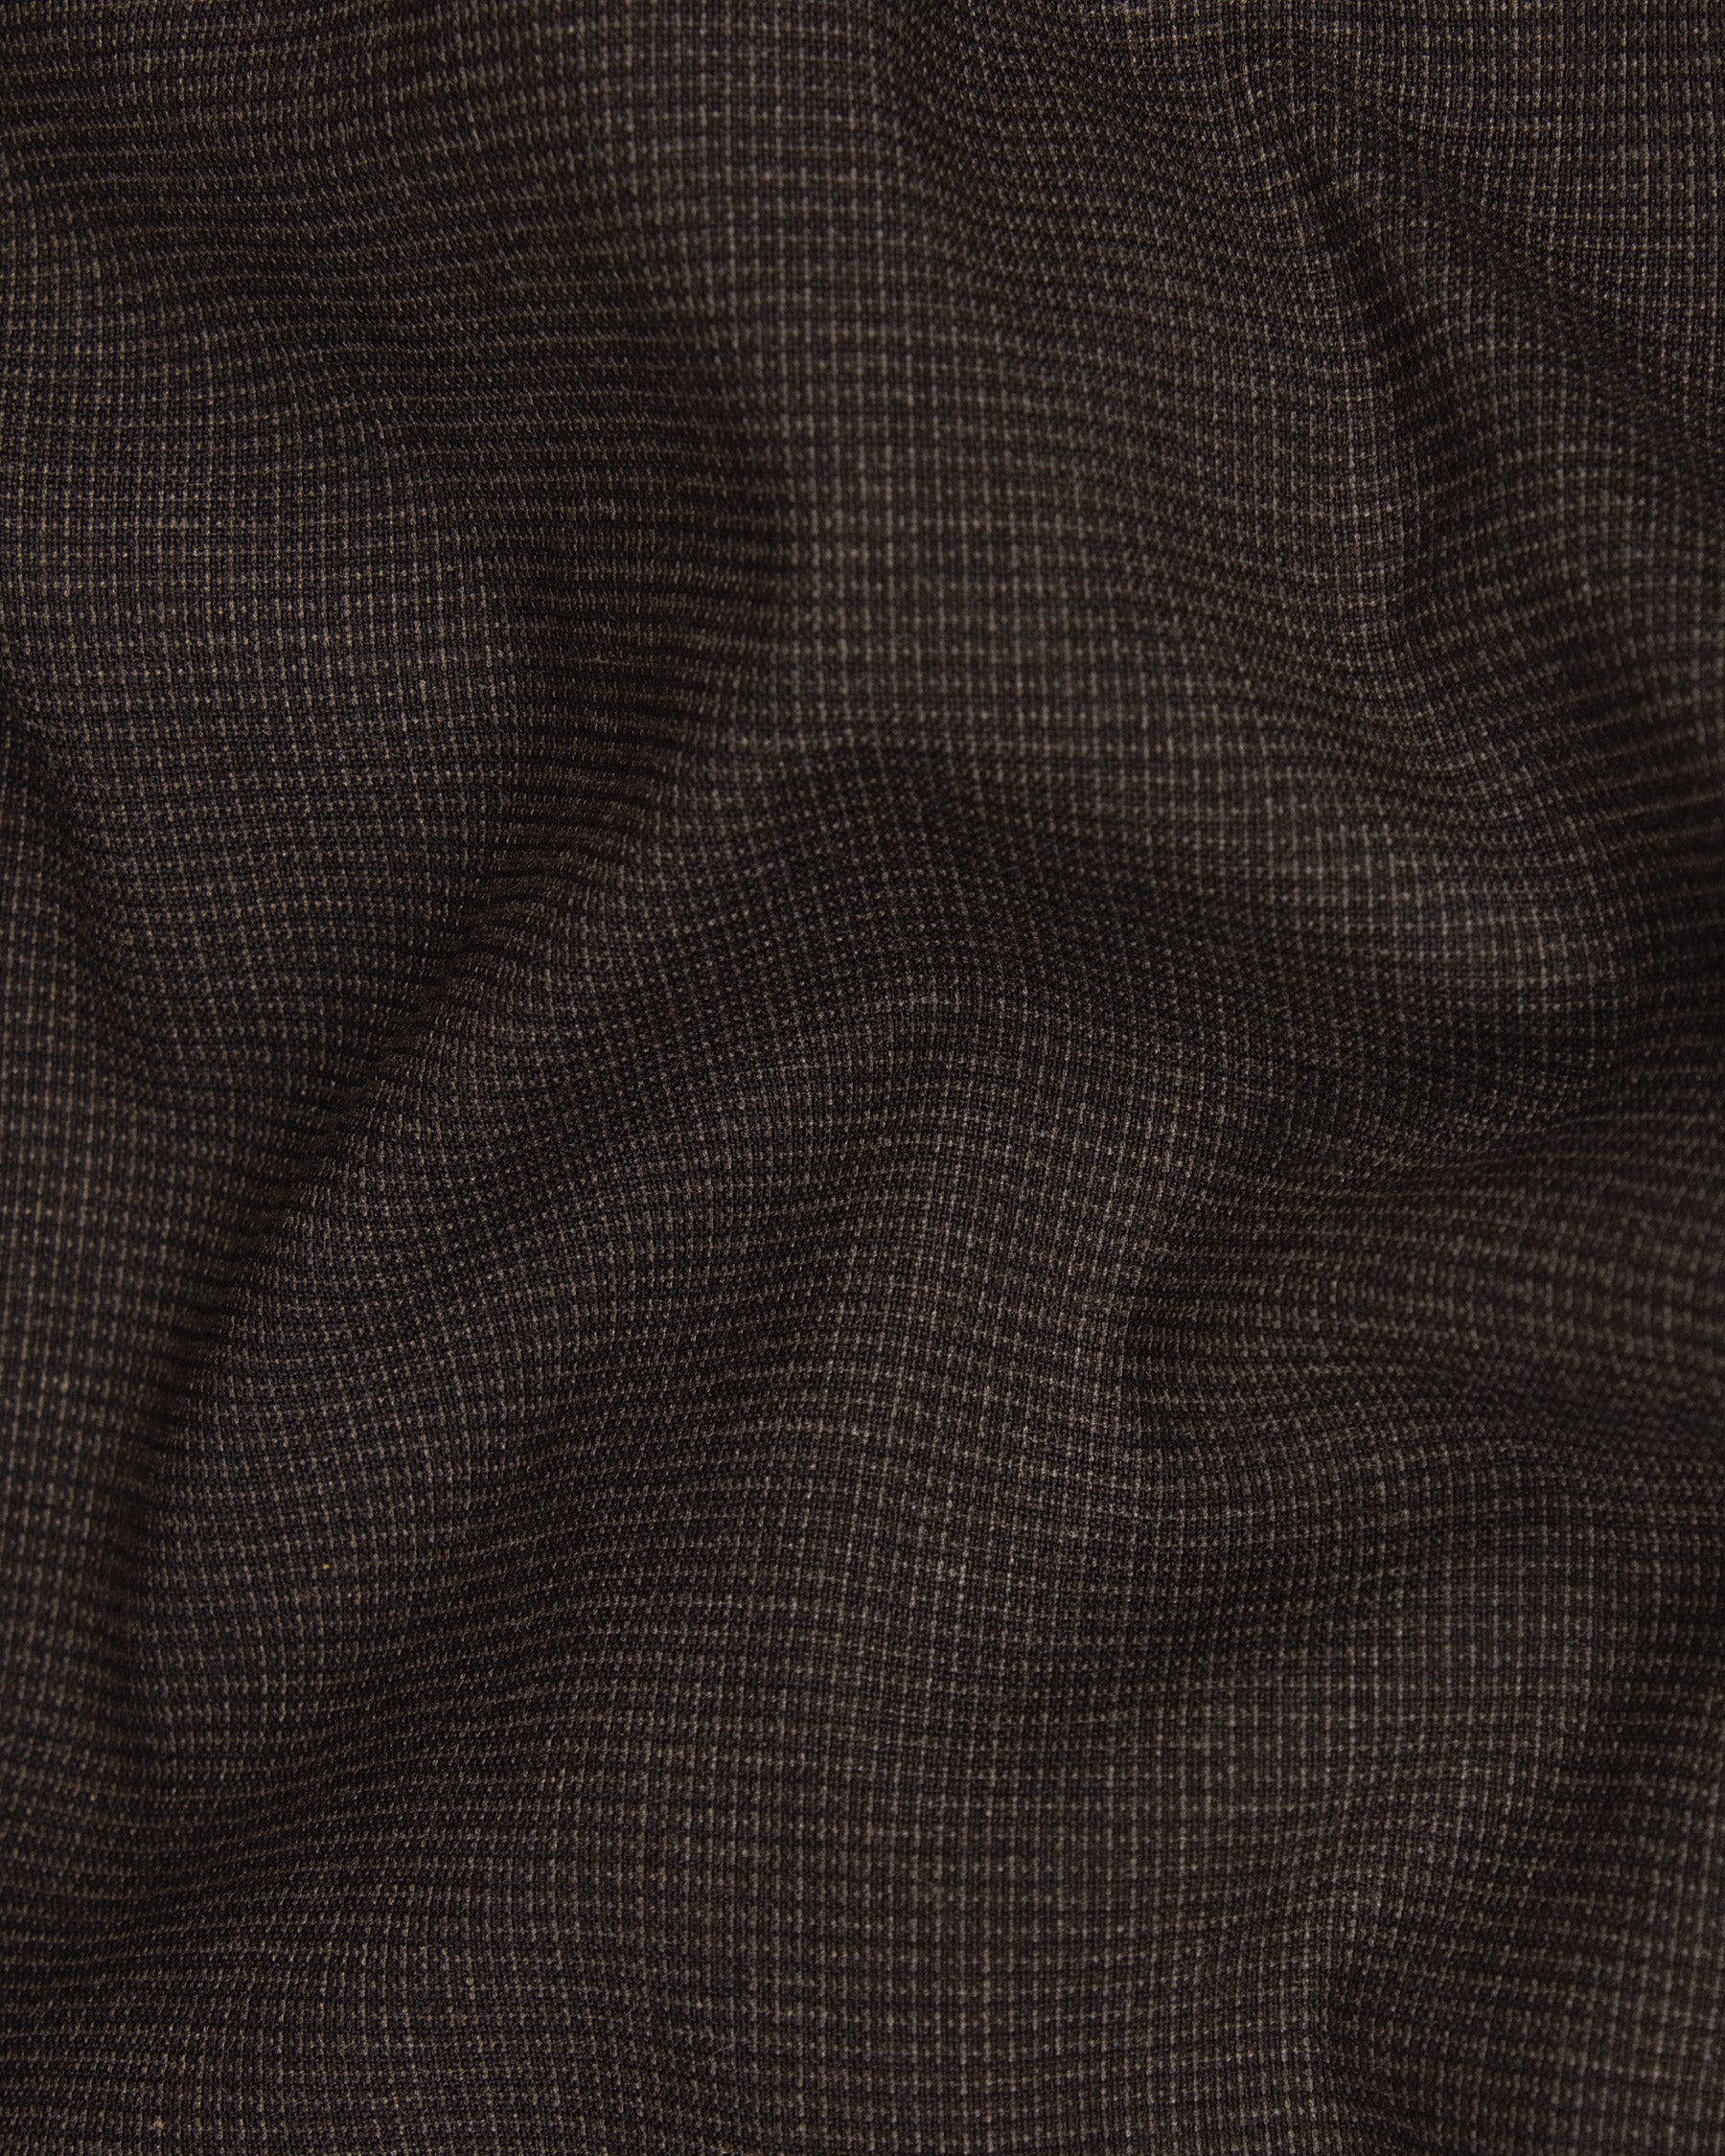 Coffee Bean Brown Double Breasted Premium Cotton Blazer BL1328-DB-36, BL1328-DB-38, BL1328-DB-40, BL1328-DB-42, BL1328-DB-44, BL1328-DB-46, BL1328-DB-48, BL1328-DB-50, BL1328-DB-52, BL1328-DB-54, BL1328-DB-56, BL1328-DB-58, BL1328-DB-60